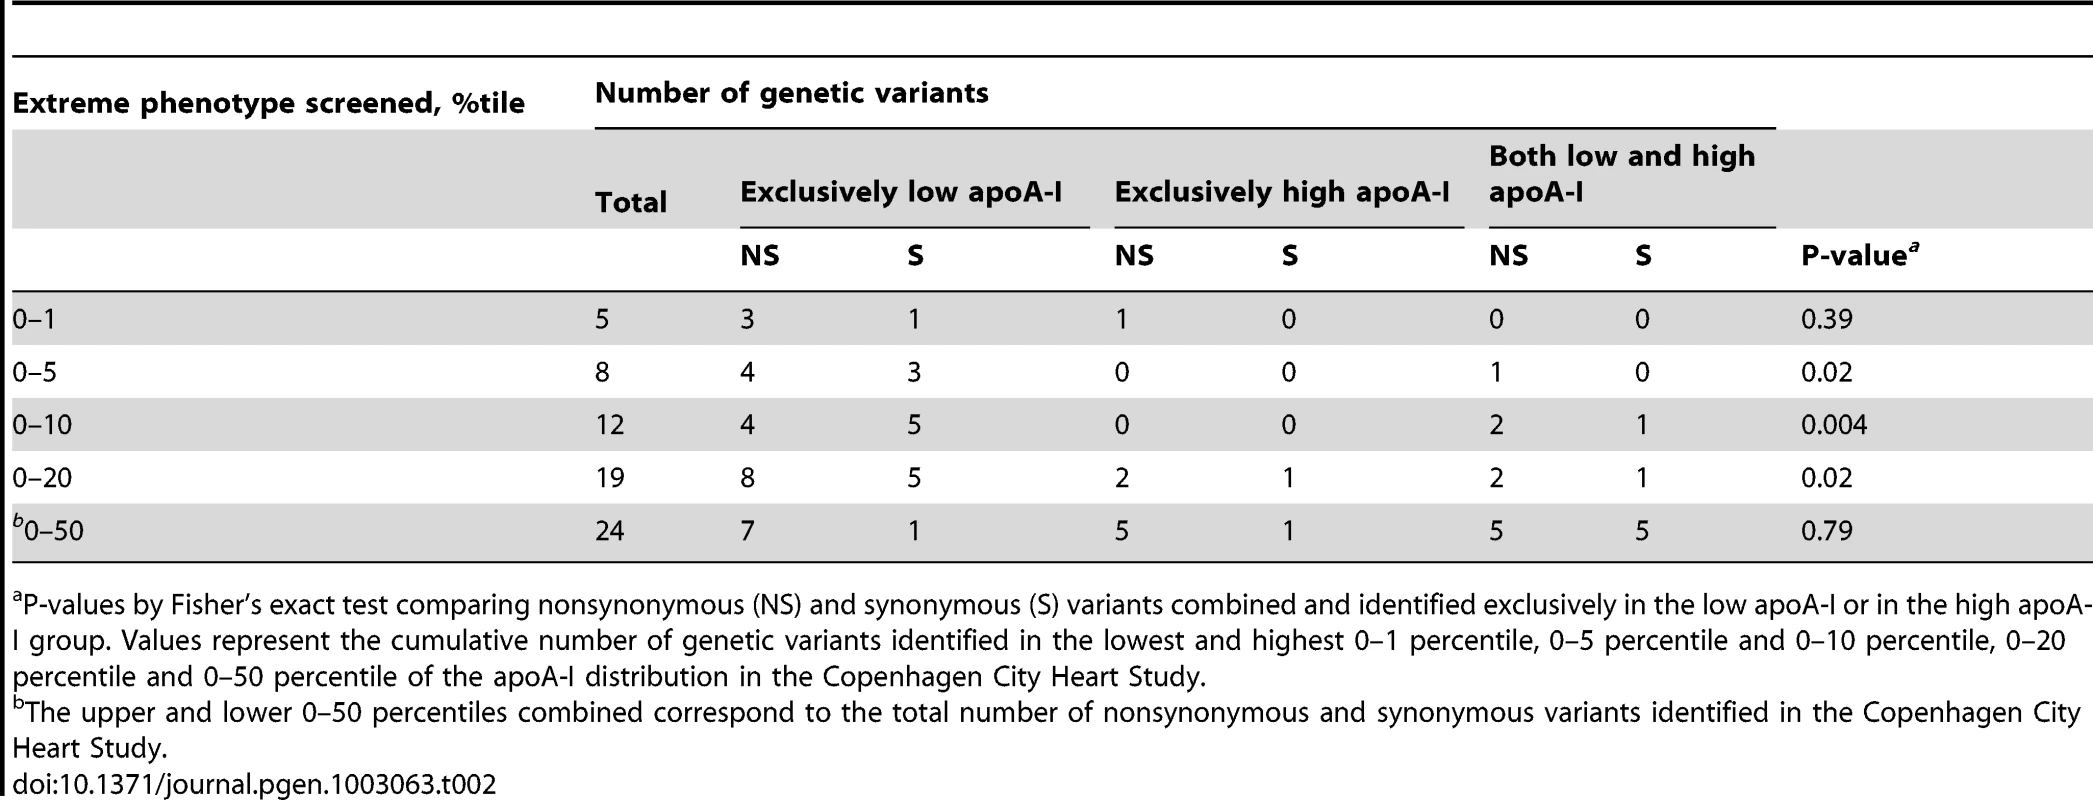 Number of nonsynonymous and synonymous variants identified in <i>APOA1</i> by apoA-I percentiles.